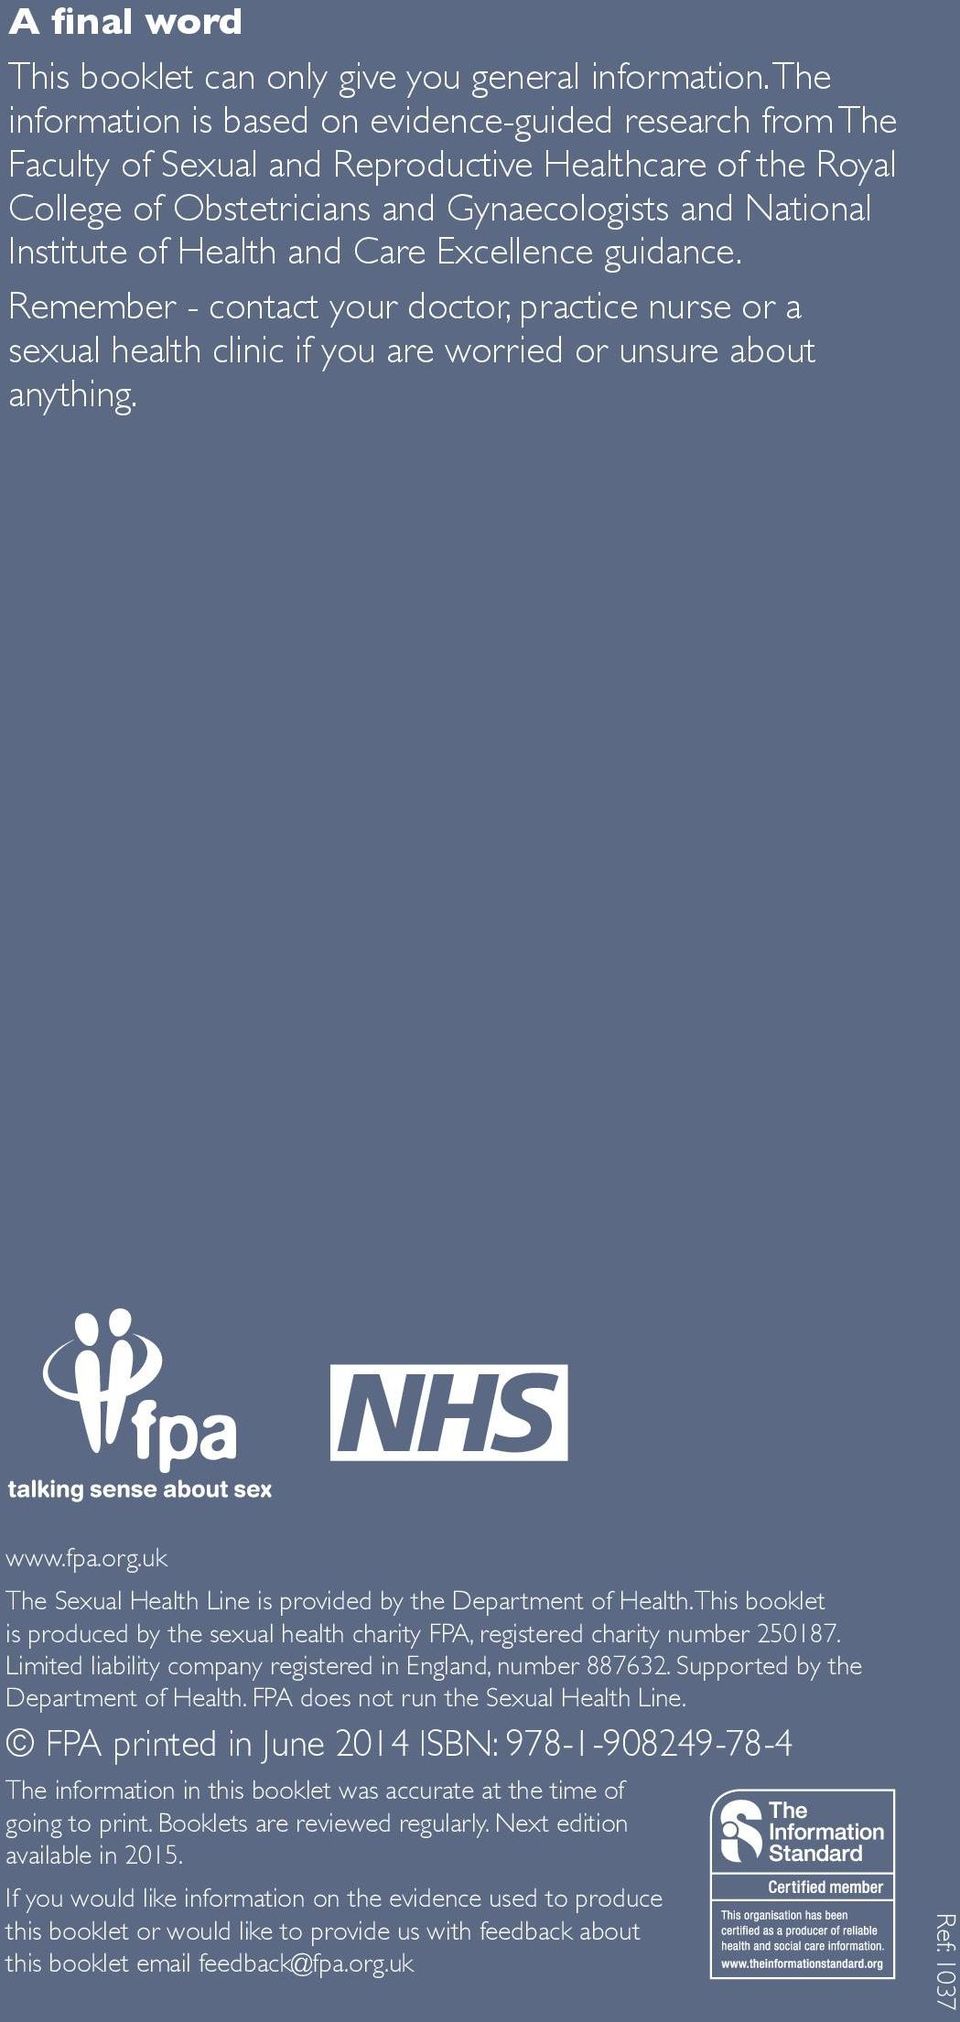 and Care Excellence guidance. Remember - contact your doctor, practice nurse or a sexual health clinic if you are worried or unsure about anything. www.fpa.org.